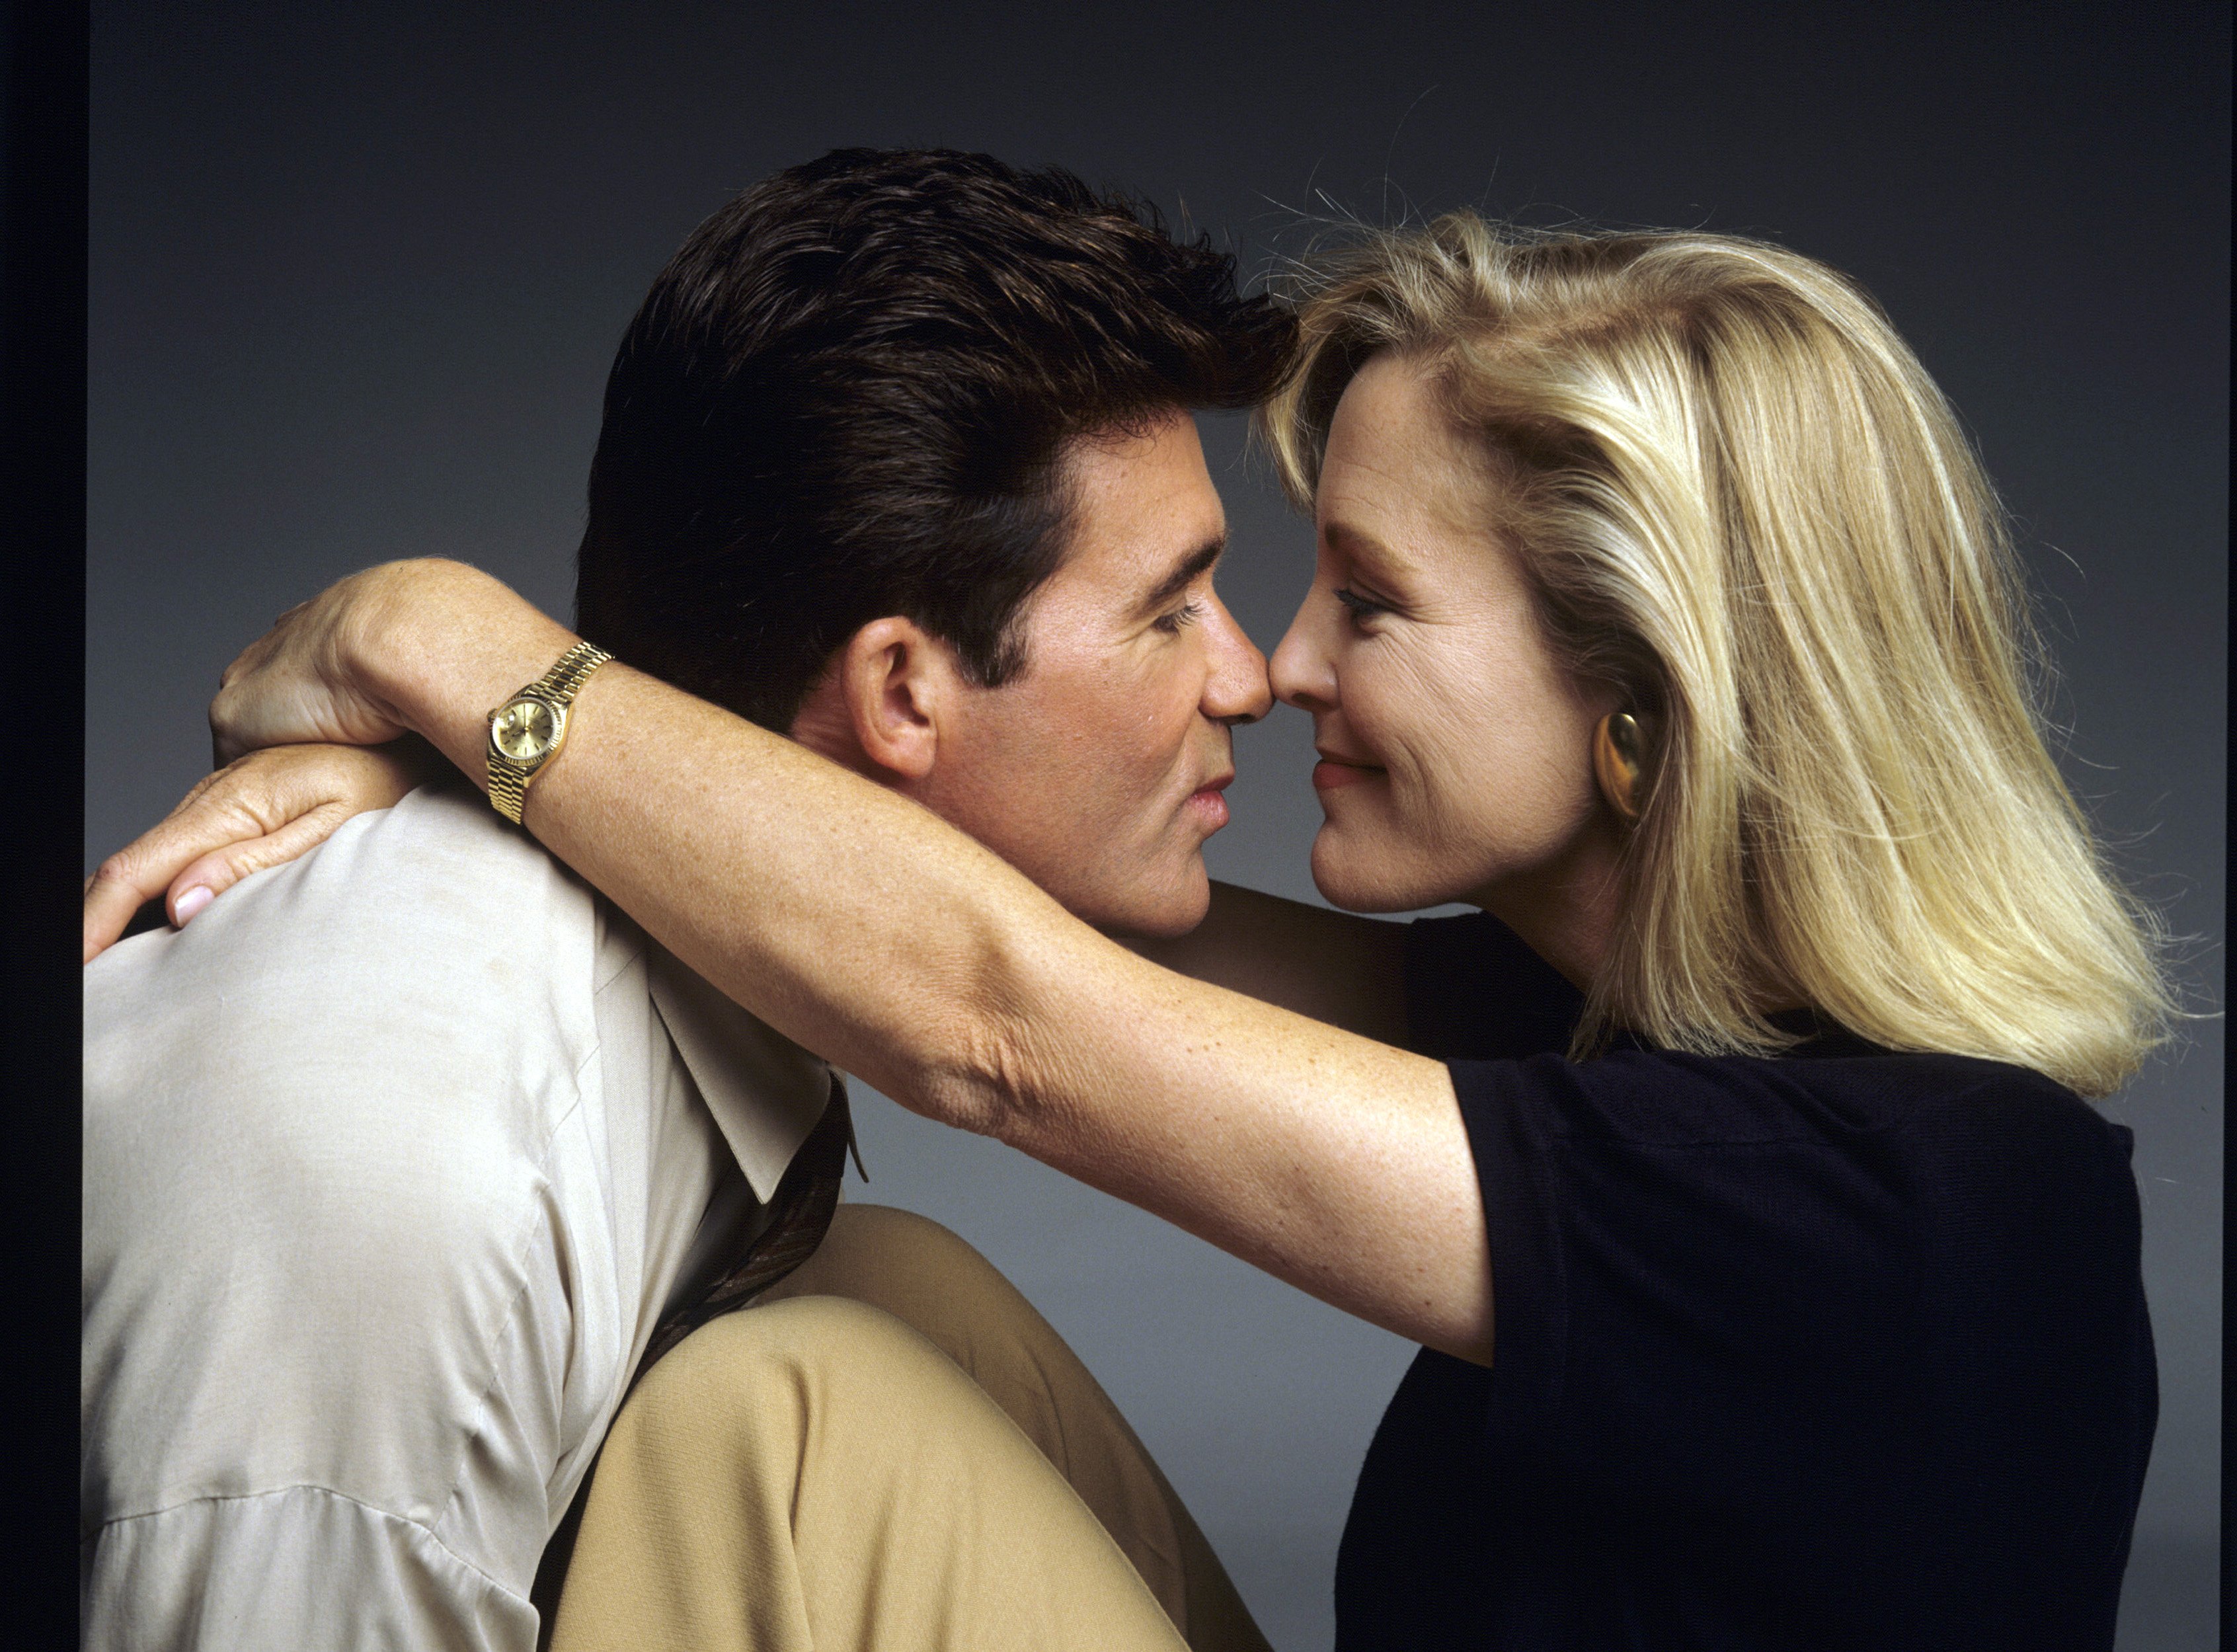 Alan Thicke and Joanna Kerns posing for a "Growing Pains" shoot on June 27, 1989 | Source: Getty Images